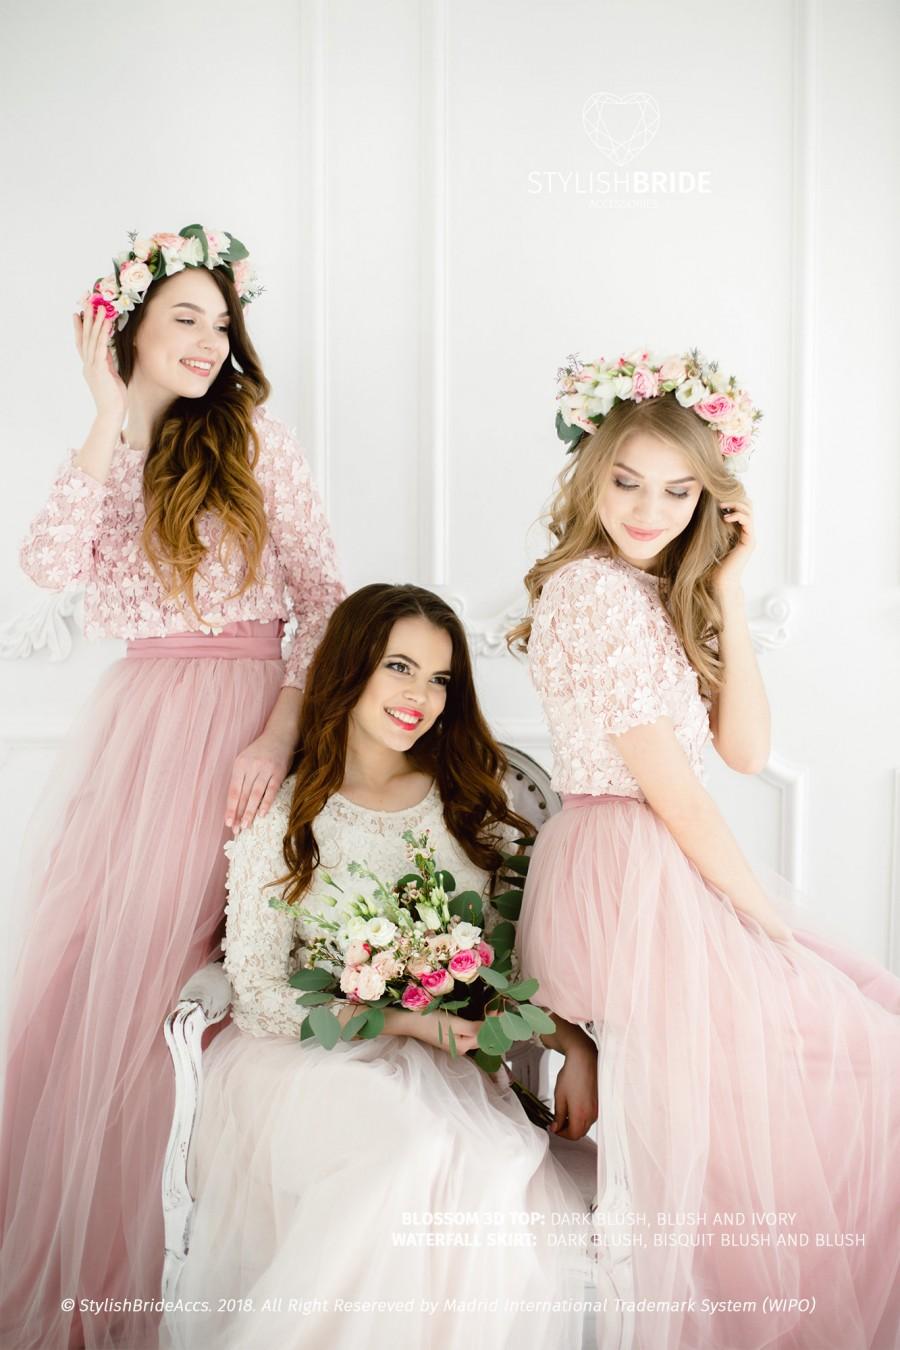 Mariage - Blossom Lace Dress, Top and Tulle Skirt in Blush Ivory color, Bridesmaids blossom from 3dlace, Blush Prom Dresses Plus Size, Engagement top